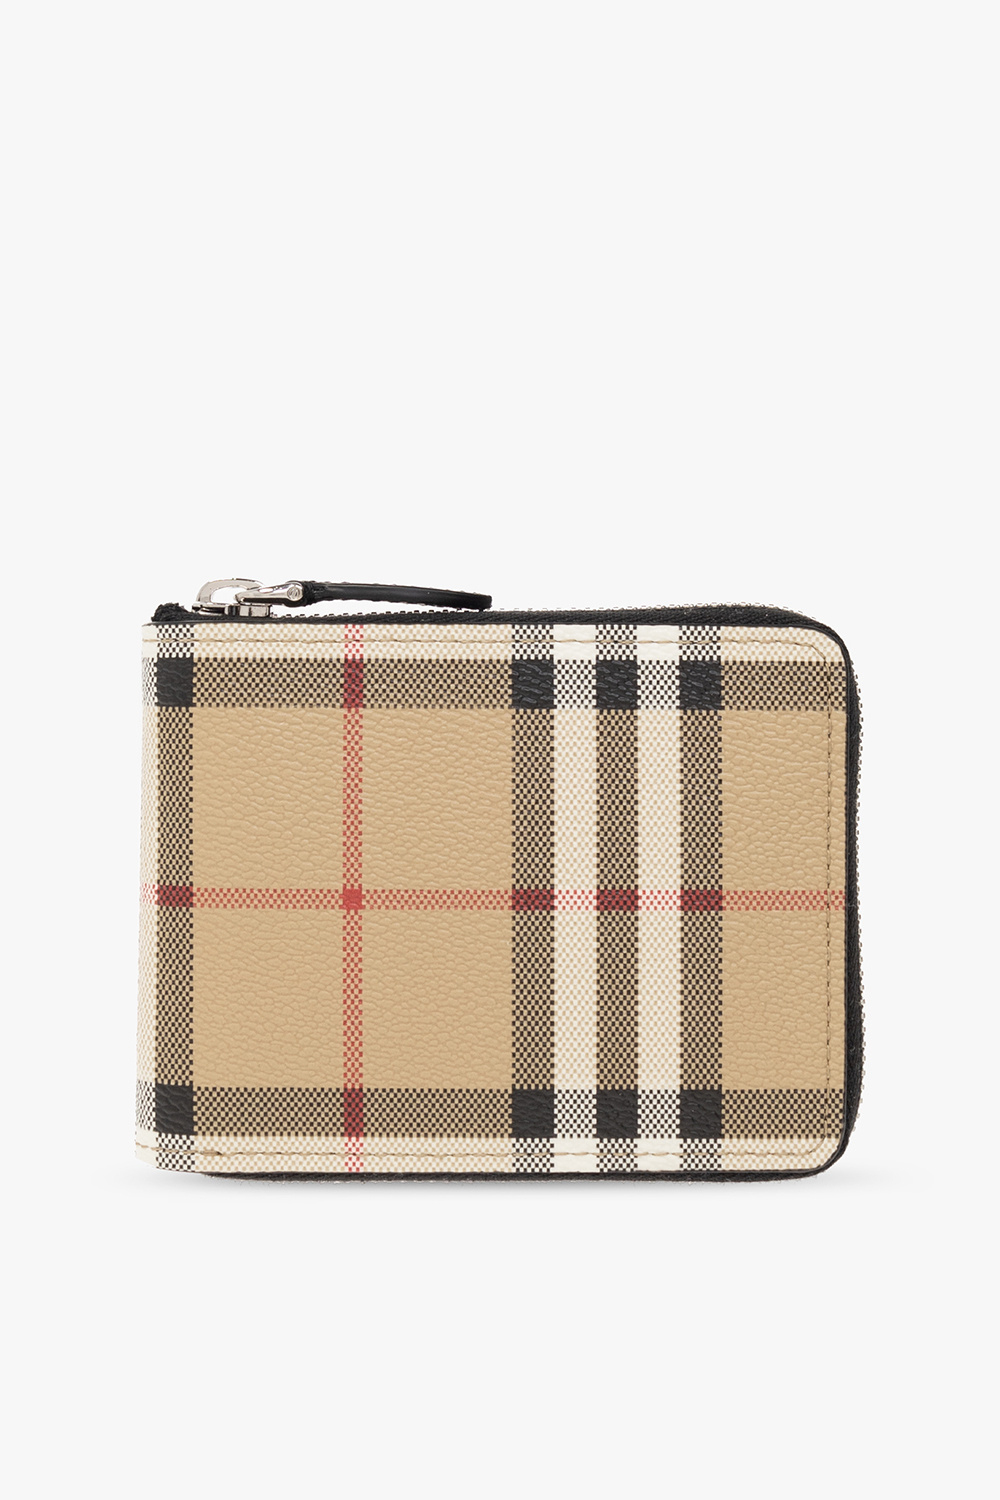 Burberry, Accessories, Classic Burberry Wallet